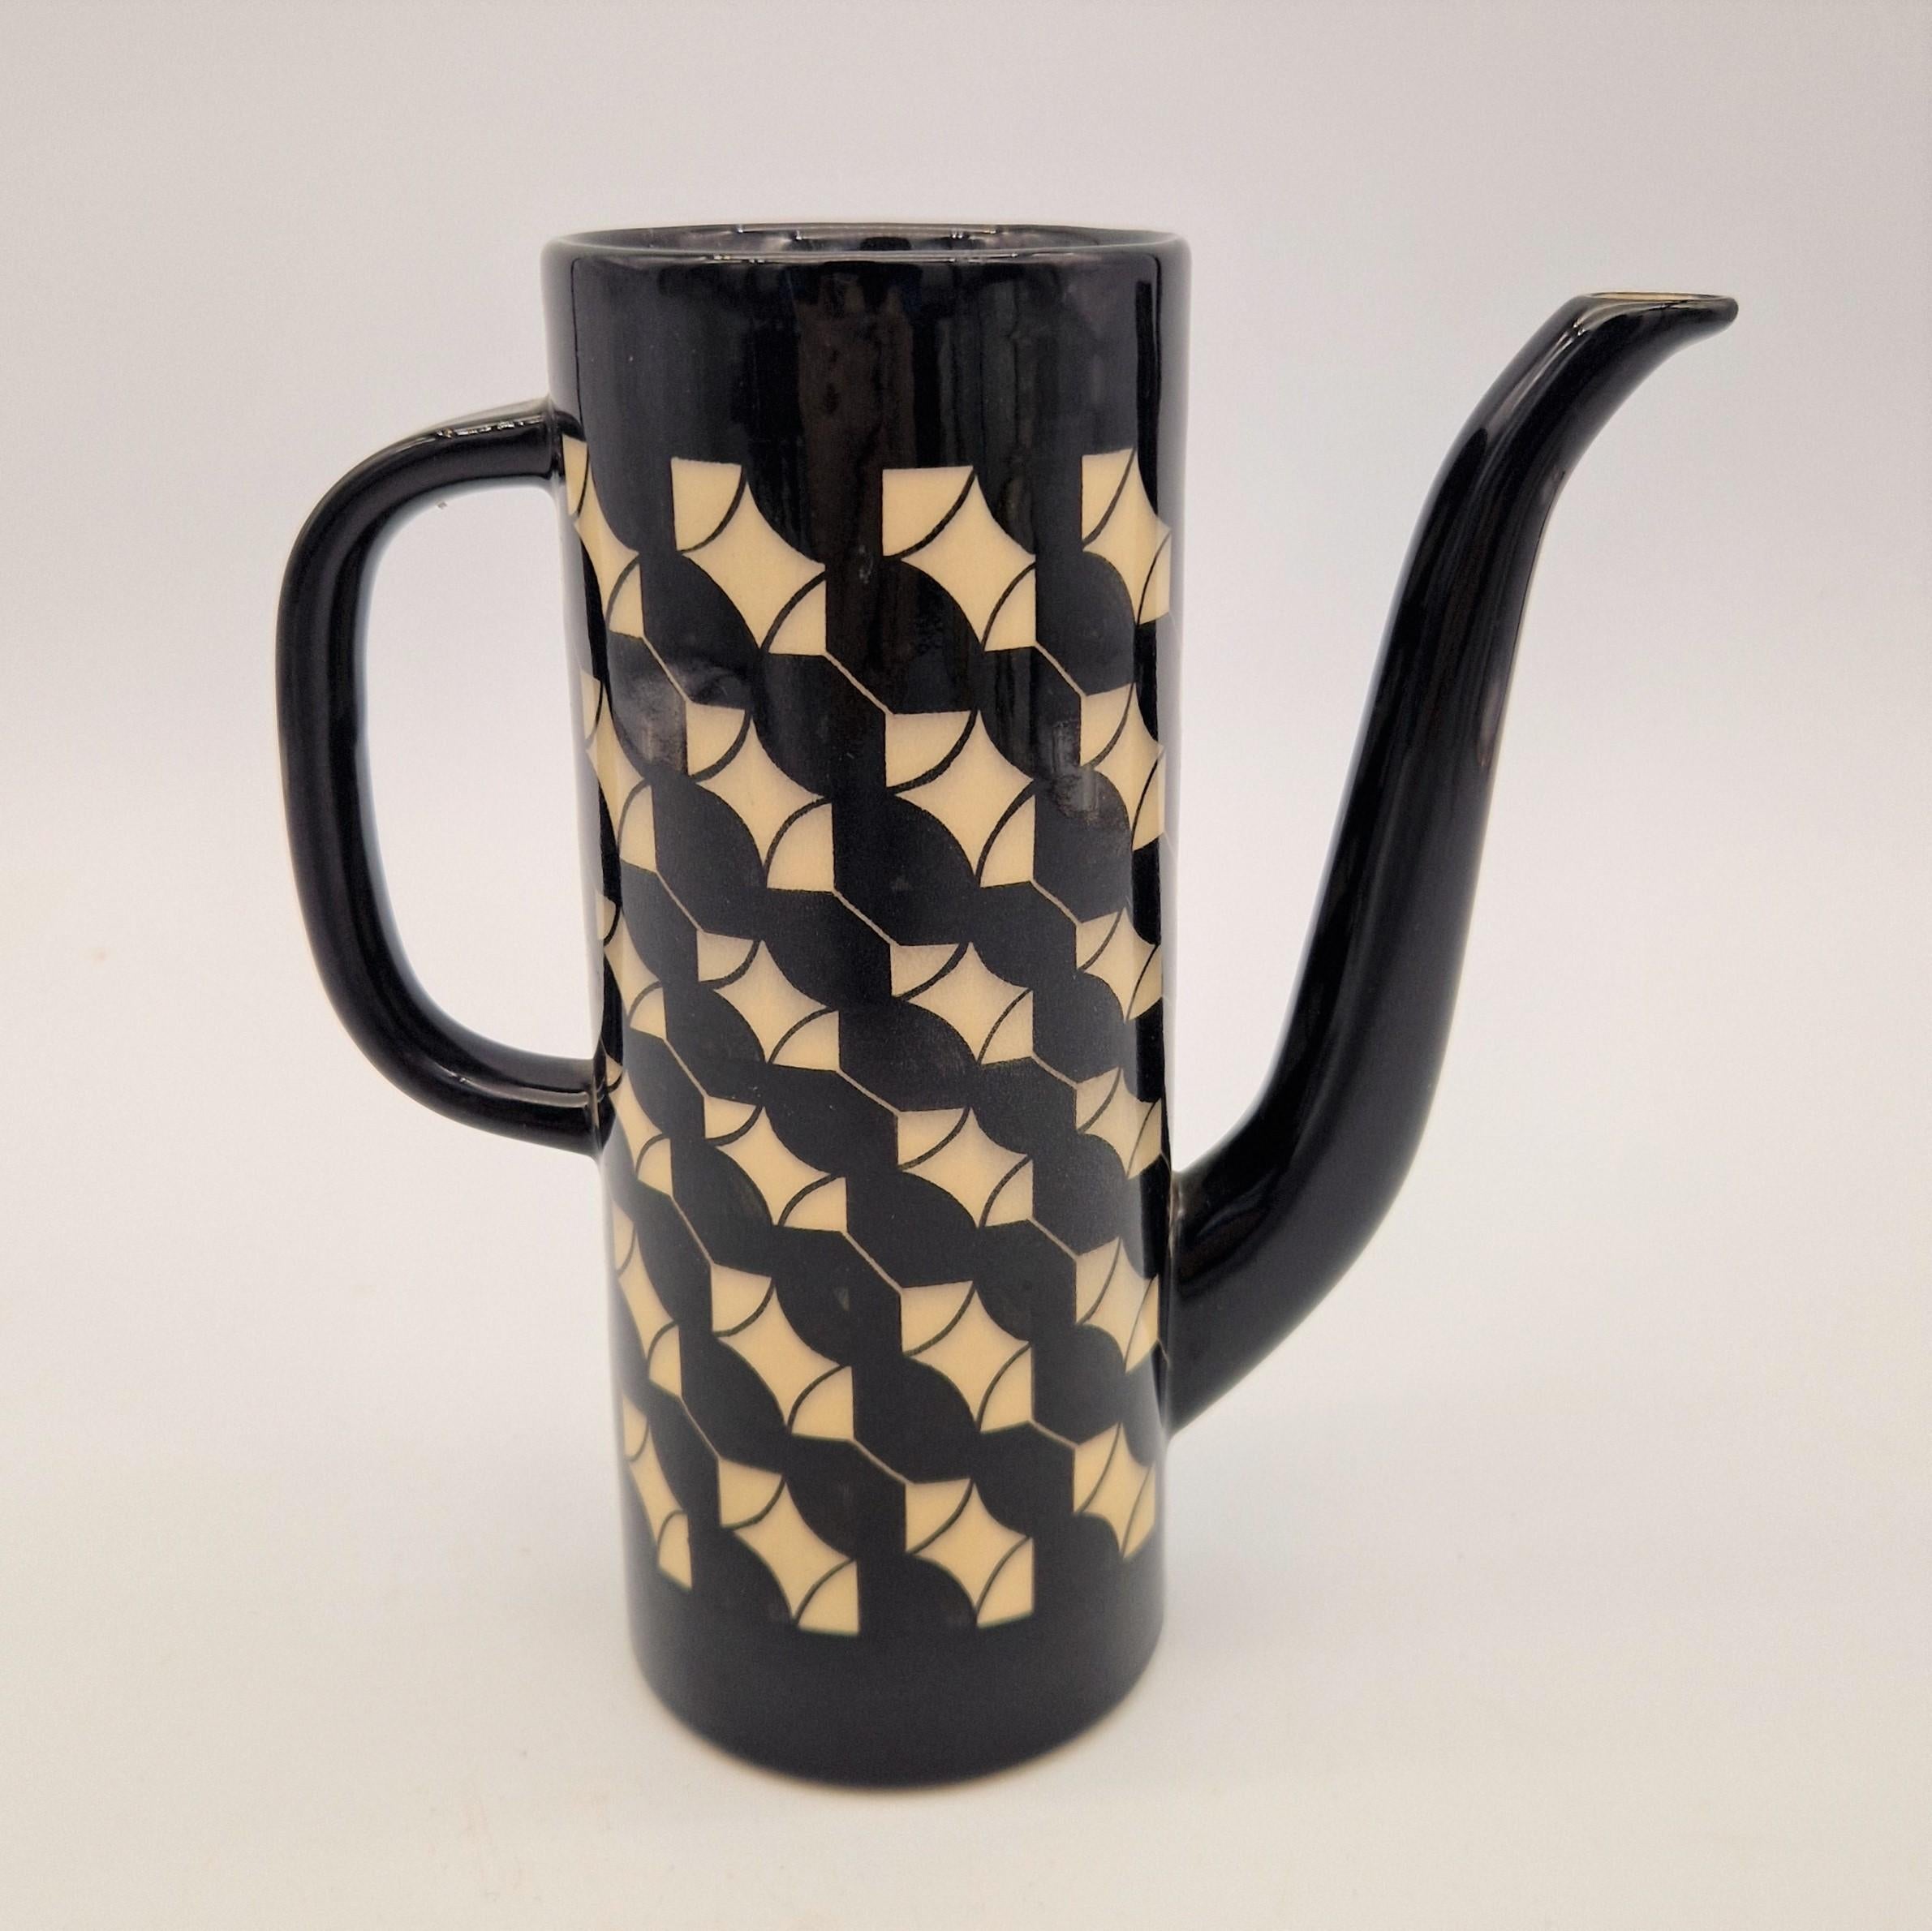 All the items are hand painted from Hedwig Bollhagen. (1907-2001)
During her time she worked with the great Bauhaus artists
All parts are handmade
Can: 21 x 17 x 7 cm
Cup: 5,5 x 5 cm
Plate: 12 cm
Perfect condition